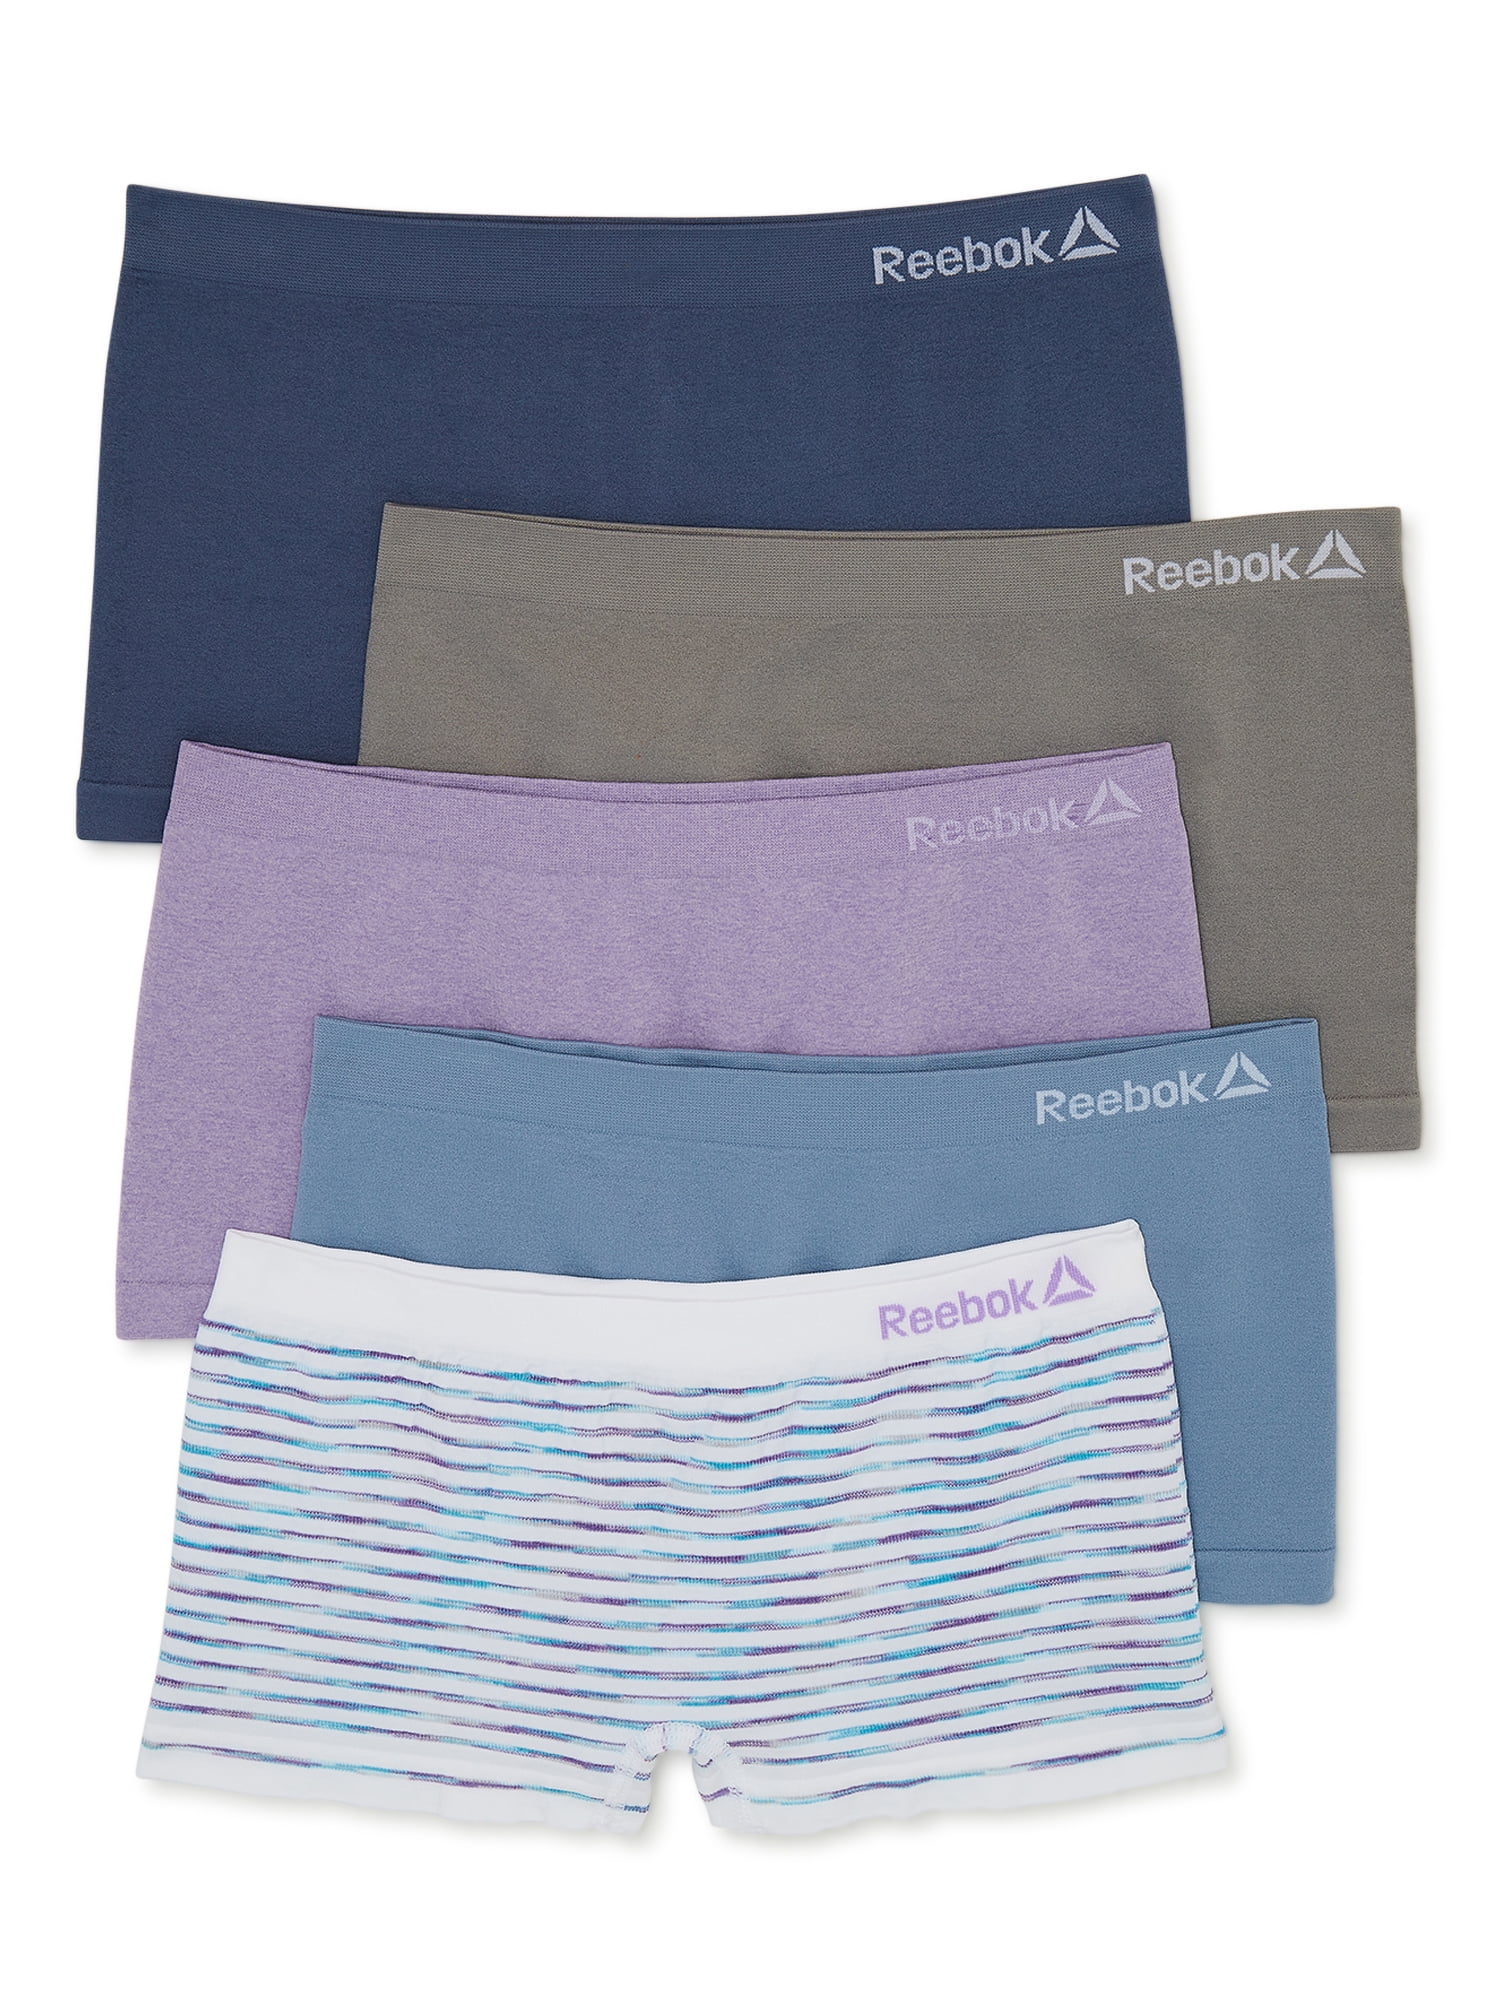  Reebok Girls? Underwear - Seamless Hipster Briefs (3 Pack), Size  Small, Blue Spacedye/Pink/Red: Clothing, Shoes & Jewelry